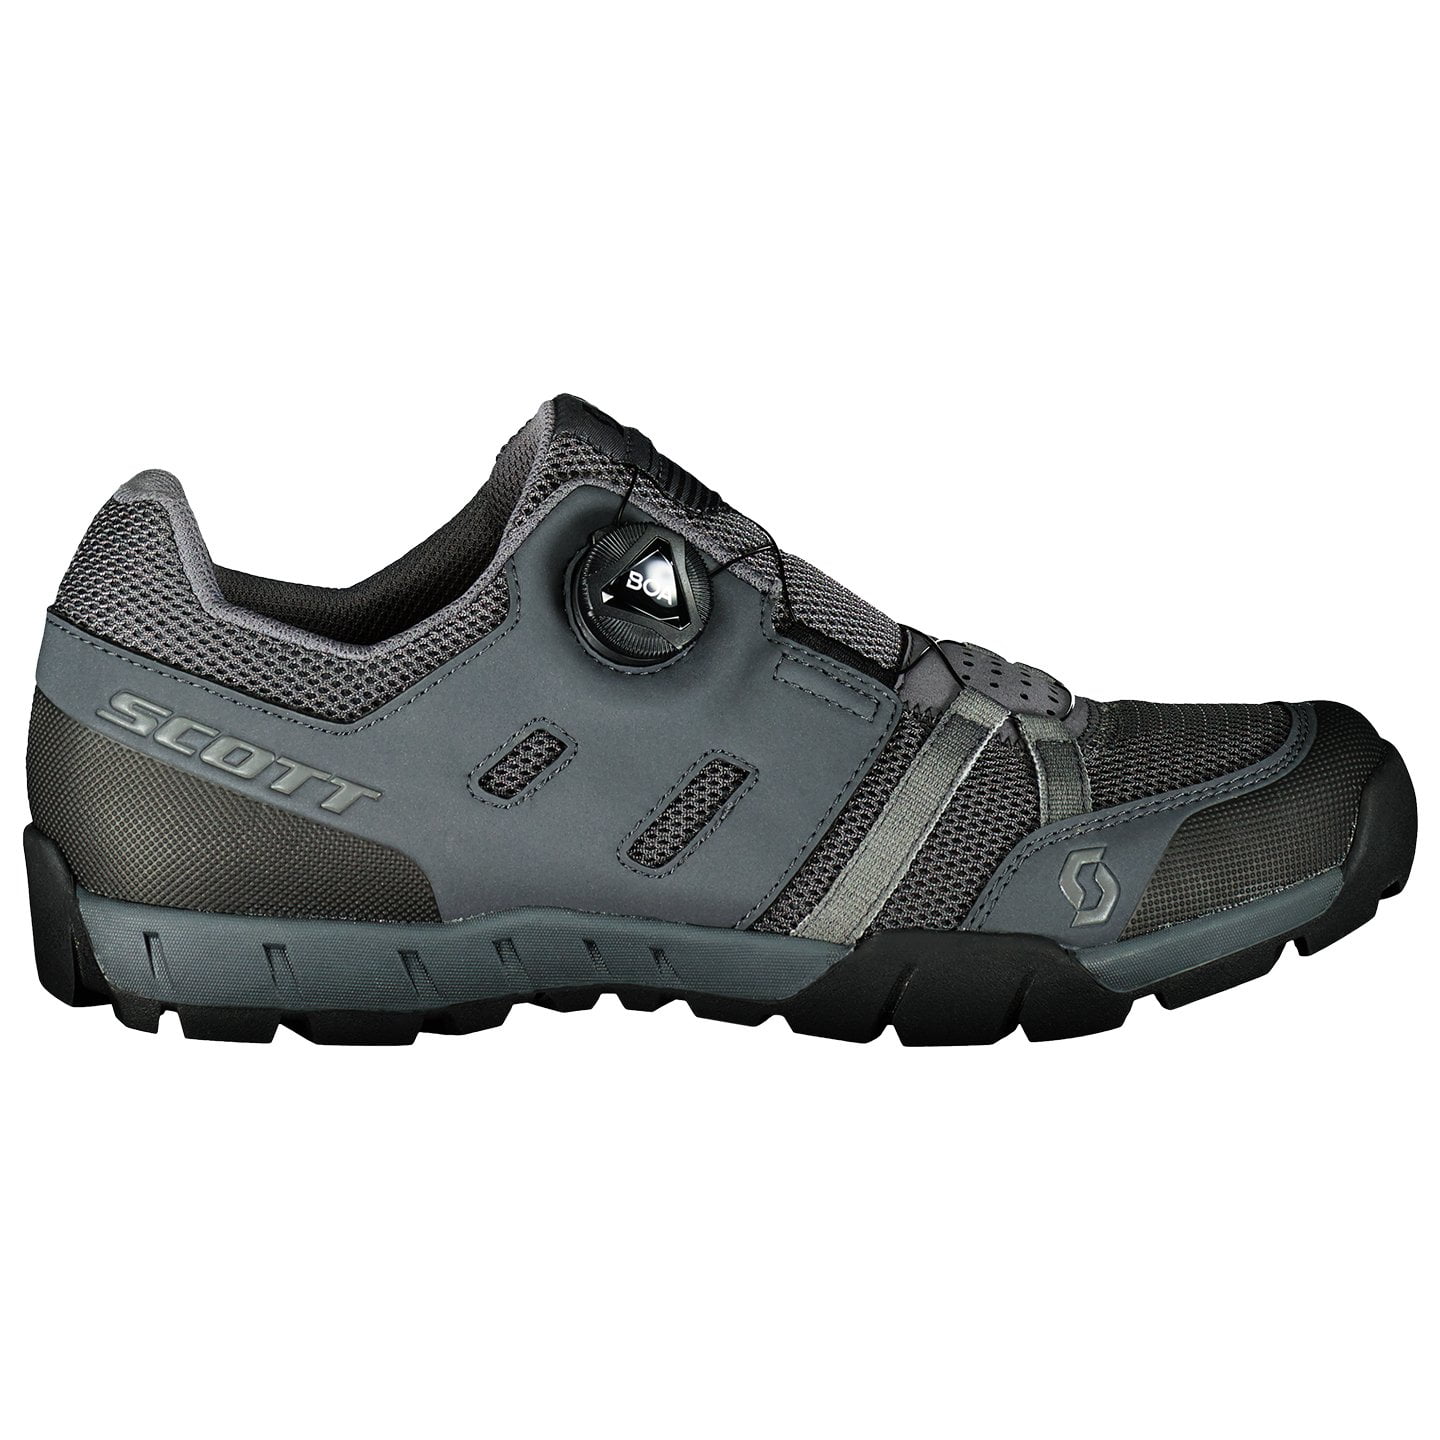 Sport Crus-R Boa 2024 MTB Shoes MTB Shoes, for men, size 40, Cycle shoes